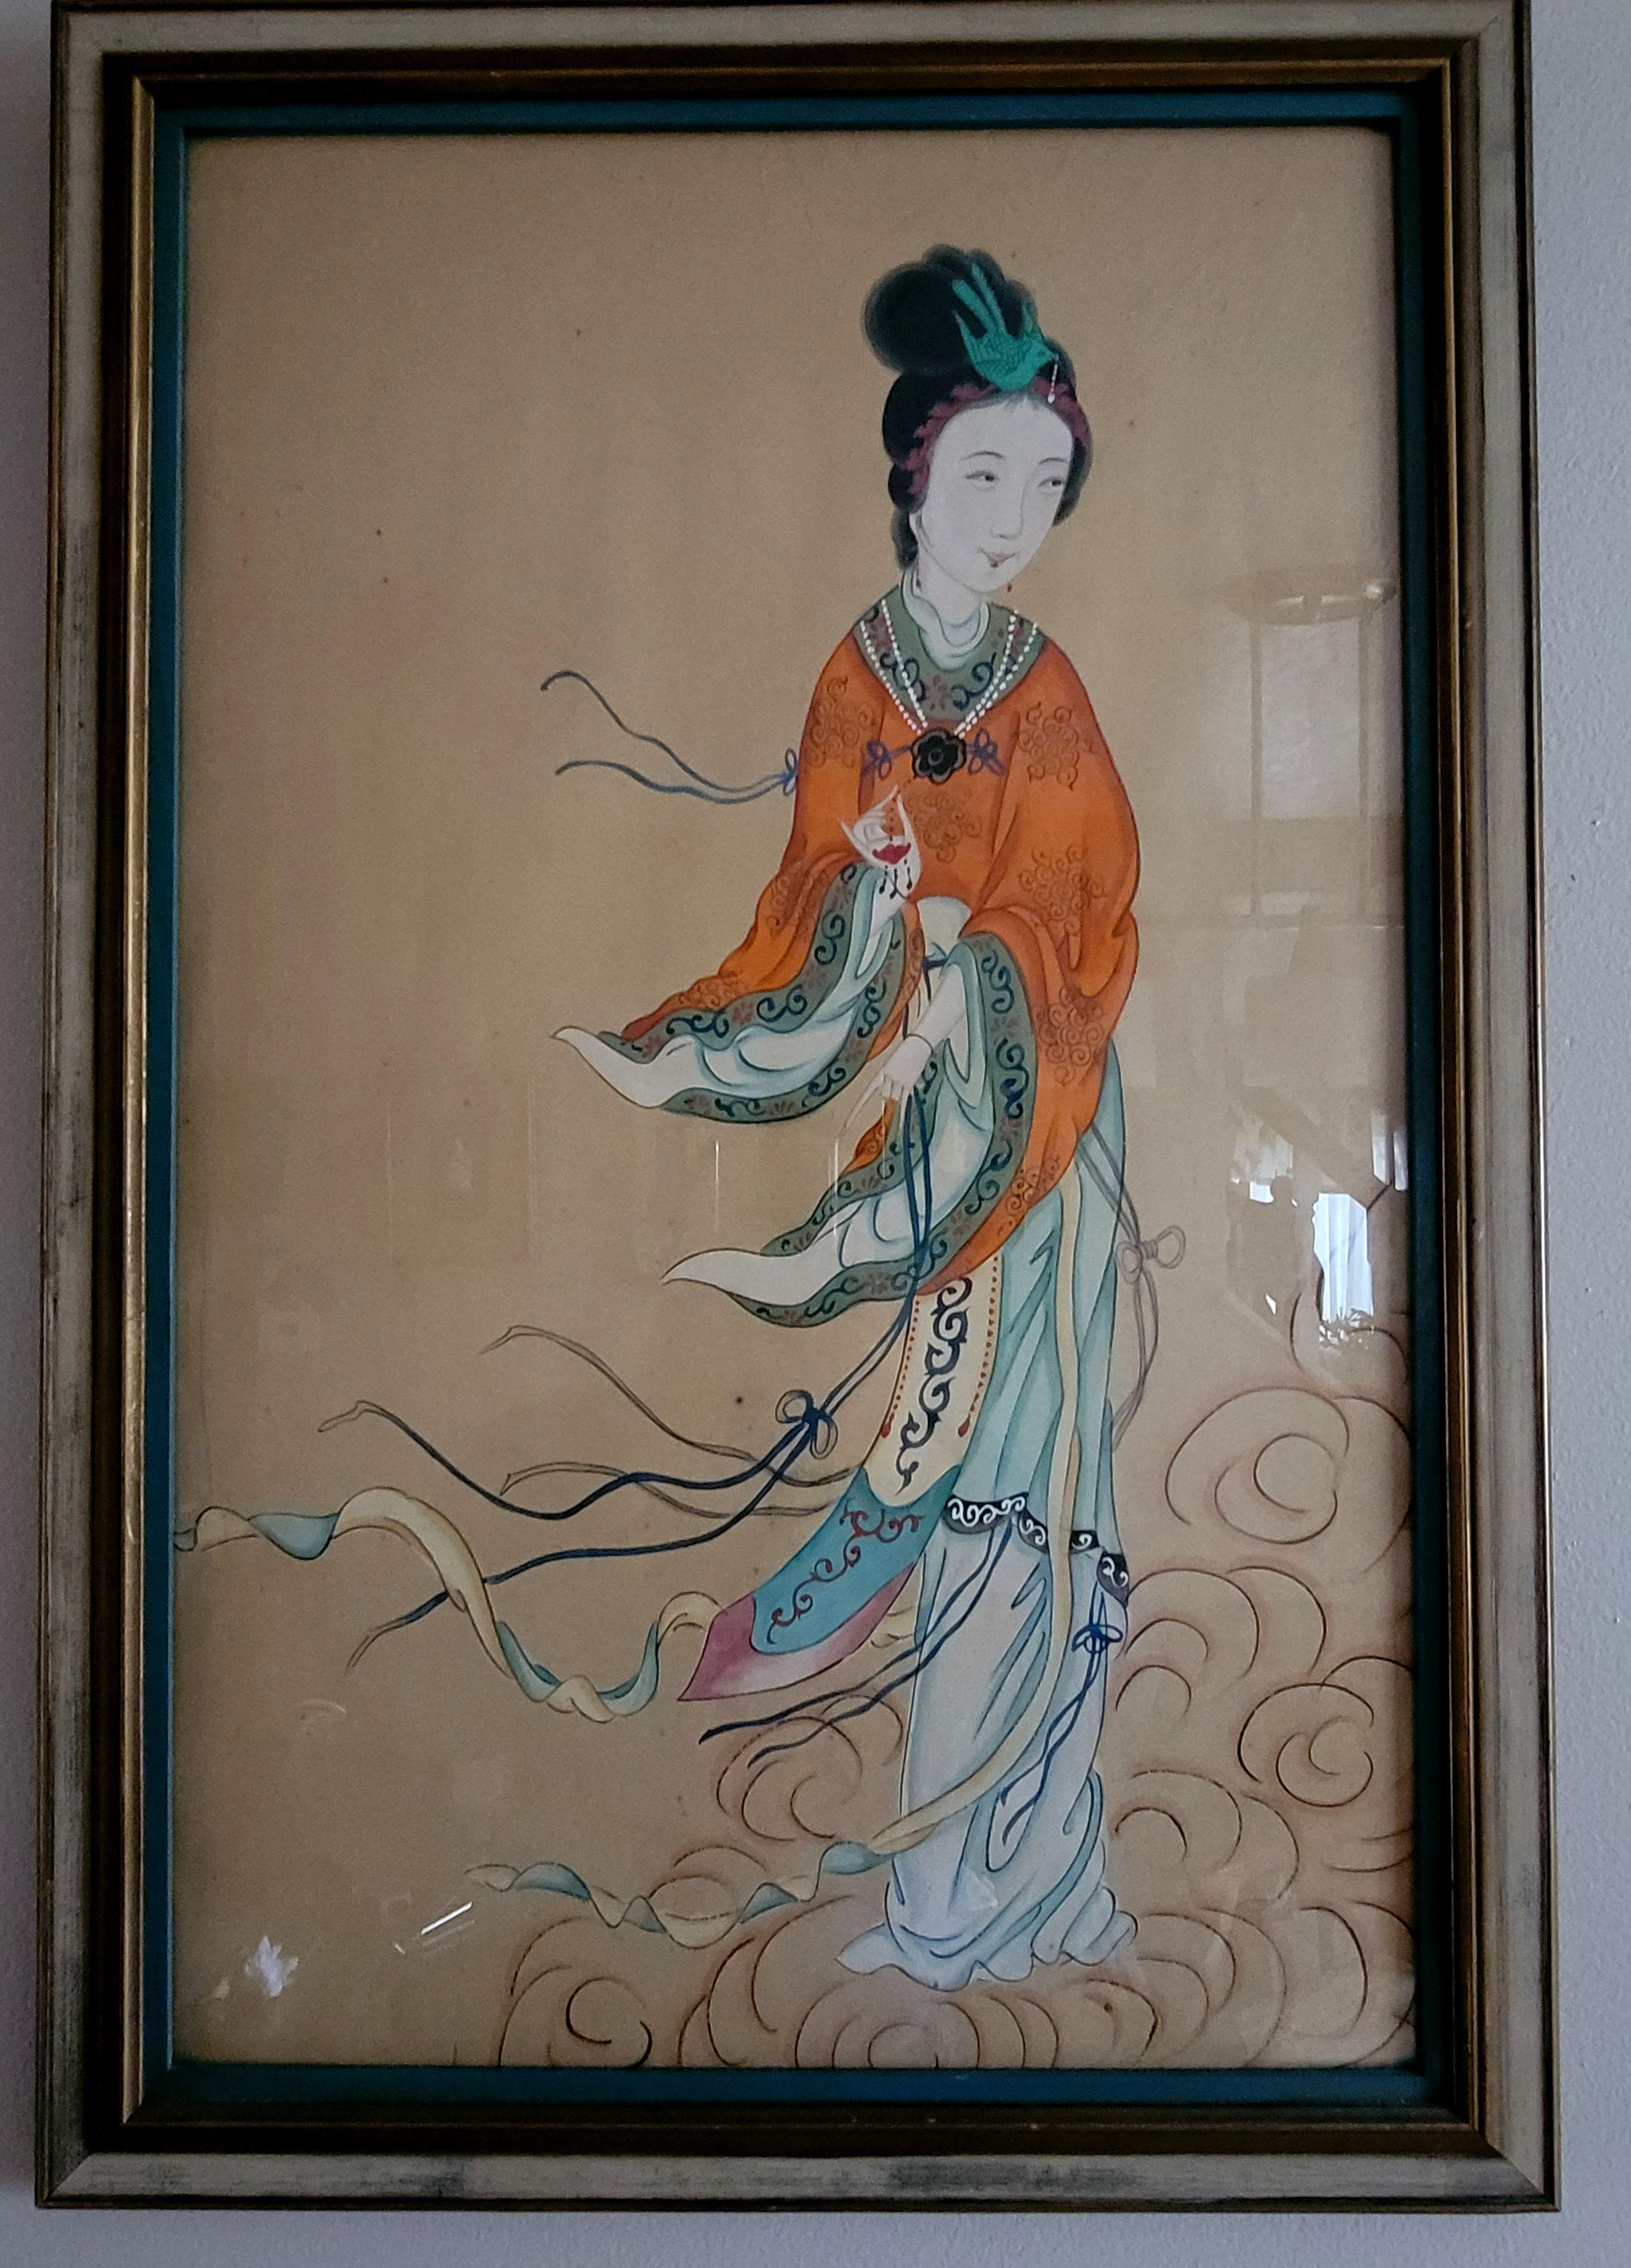 This listing is for a beautiful pair of 2 large Chinese Export Gouache (watercolor) Paintings on paper from the mid-19th century of the Qing Dynasty. They were painted in a delicate composition and the supper painting skill to create such beautiful